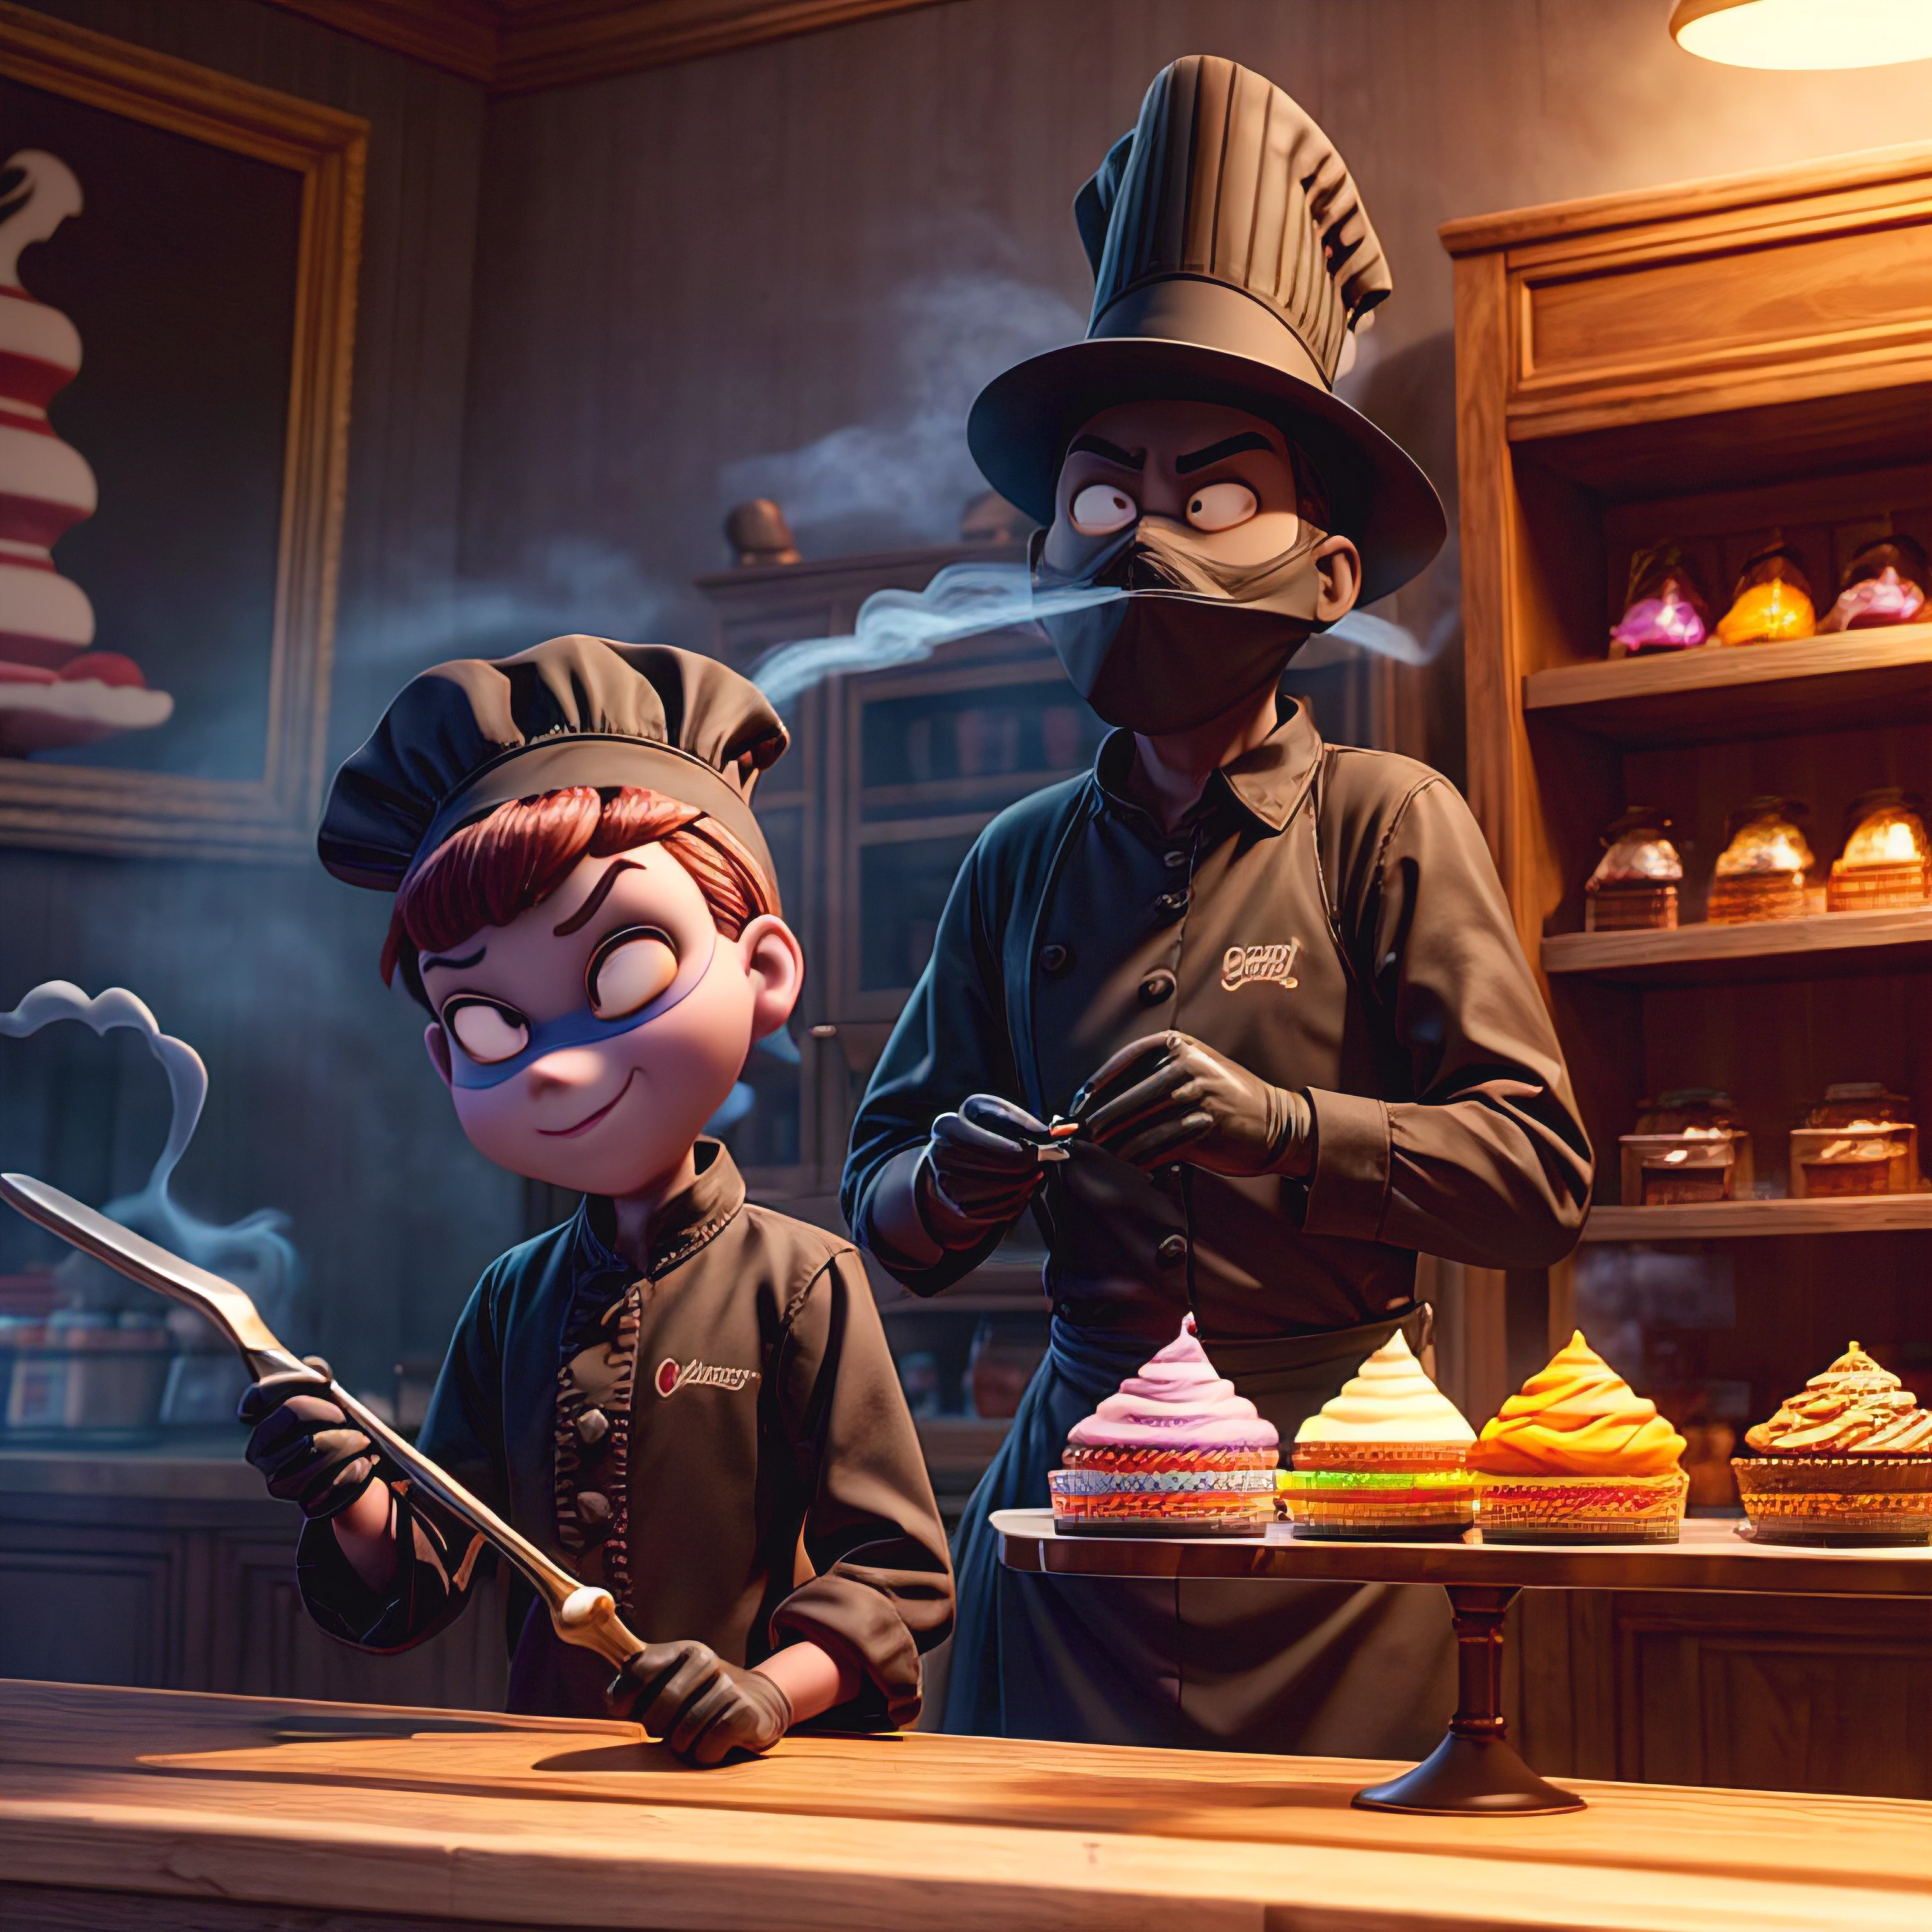 pixAr style, A (shAdowy smoke monster) posing As A (糖果商) behind A register on A counter in A cAndy shop, chef-hAt, (low Angle), detAiled, 高解析度, high quAlity, 8K, high sAturAtion, 不祥的, hiding in plAin sight